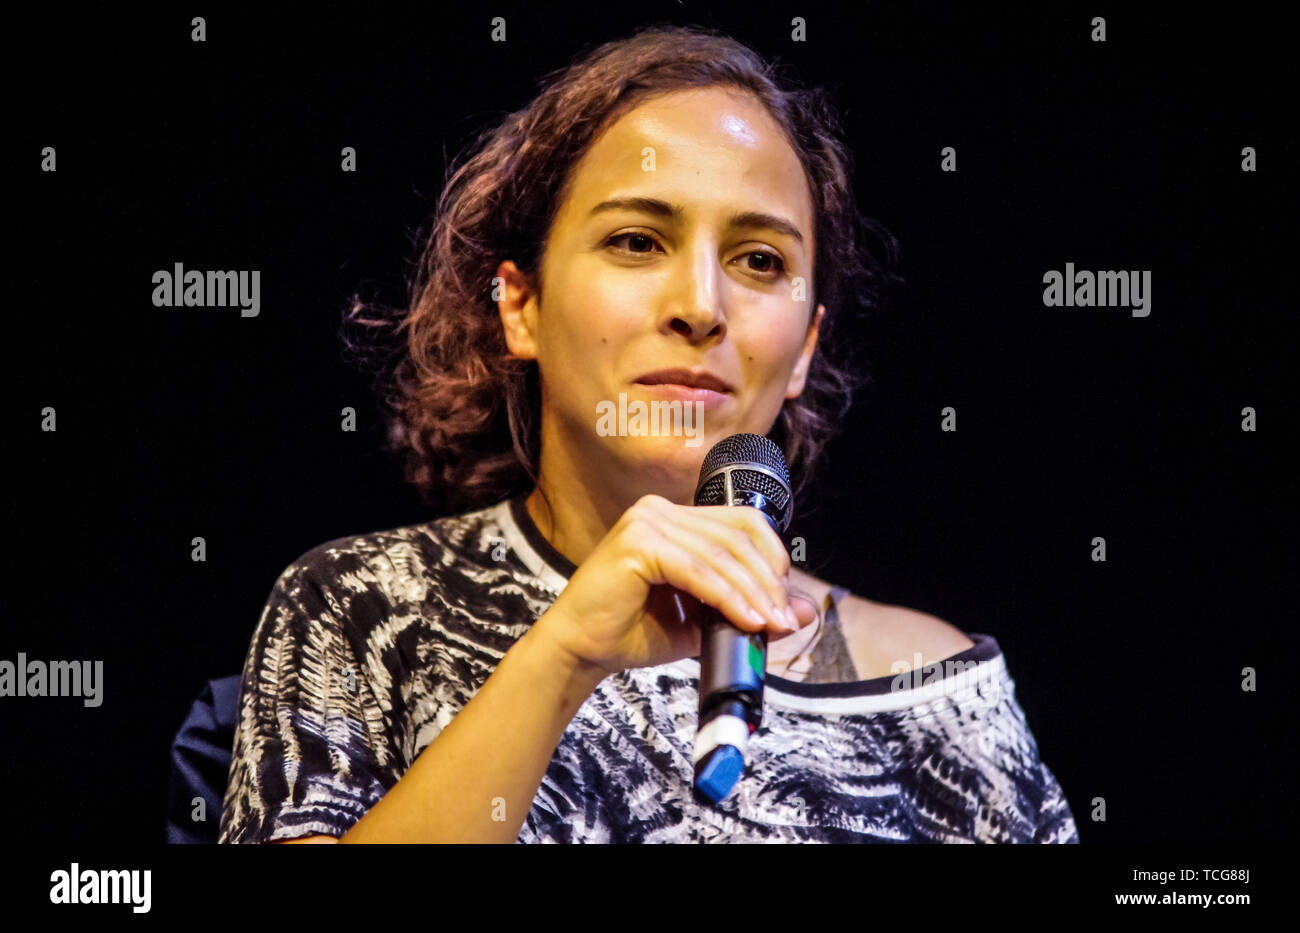 Munich, Bavaria, Germany. 7th June, 2019. Prominent gynecologist Dr. KRISTINA HAENEL spoke at a panel discussion with Munich abortion doctor FRIEDRICH STAPF, activist SARA DIEHL and PENELOPE KEMEKENIDOU at the Muenchen Kammerspiele with about Germany's controversial Nazi-era 219a law that forbids physicians from advertising counseling services and providing information for abortion. As of late, anti-abortion groups have successfully 'weaponized'' the law in order to prosecute physicians such as Dr. Haenel who was fined some 6,000 Euros. In addition, anti-abortion groups hold regular dem Stock Photo